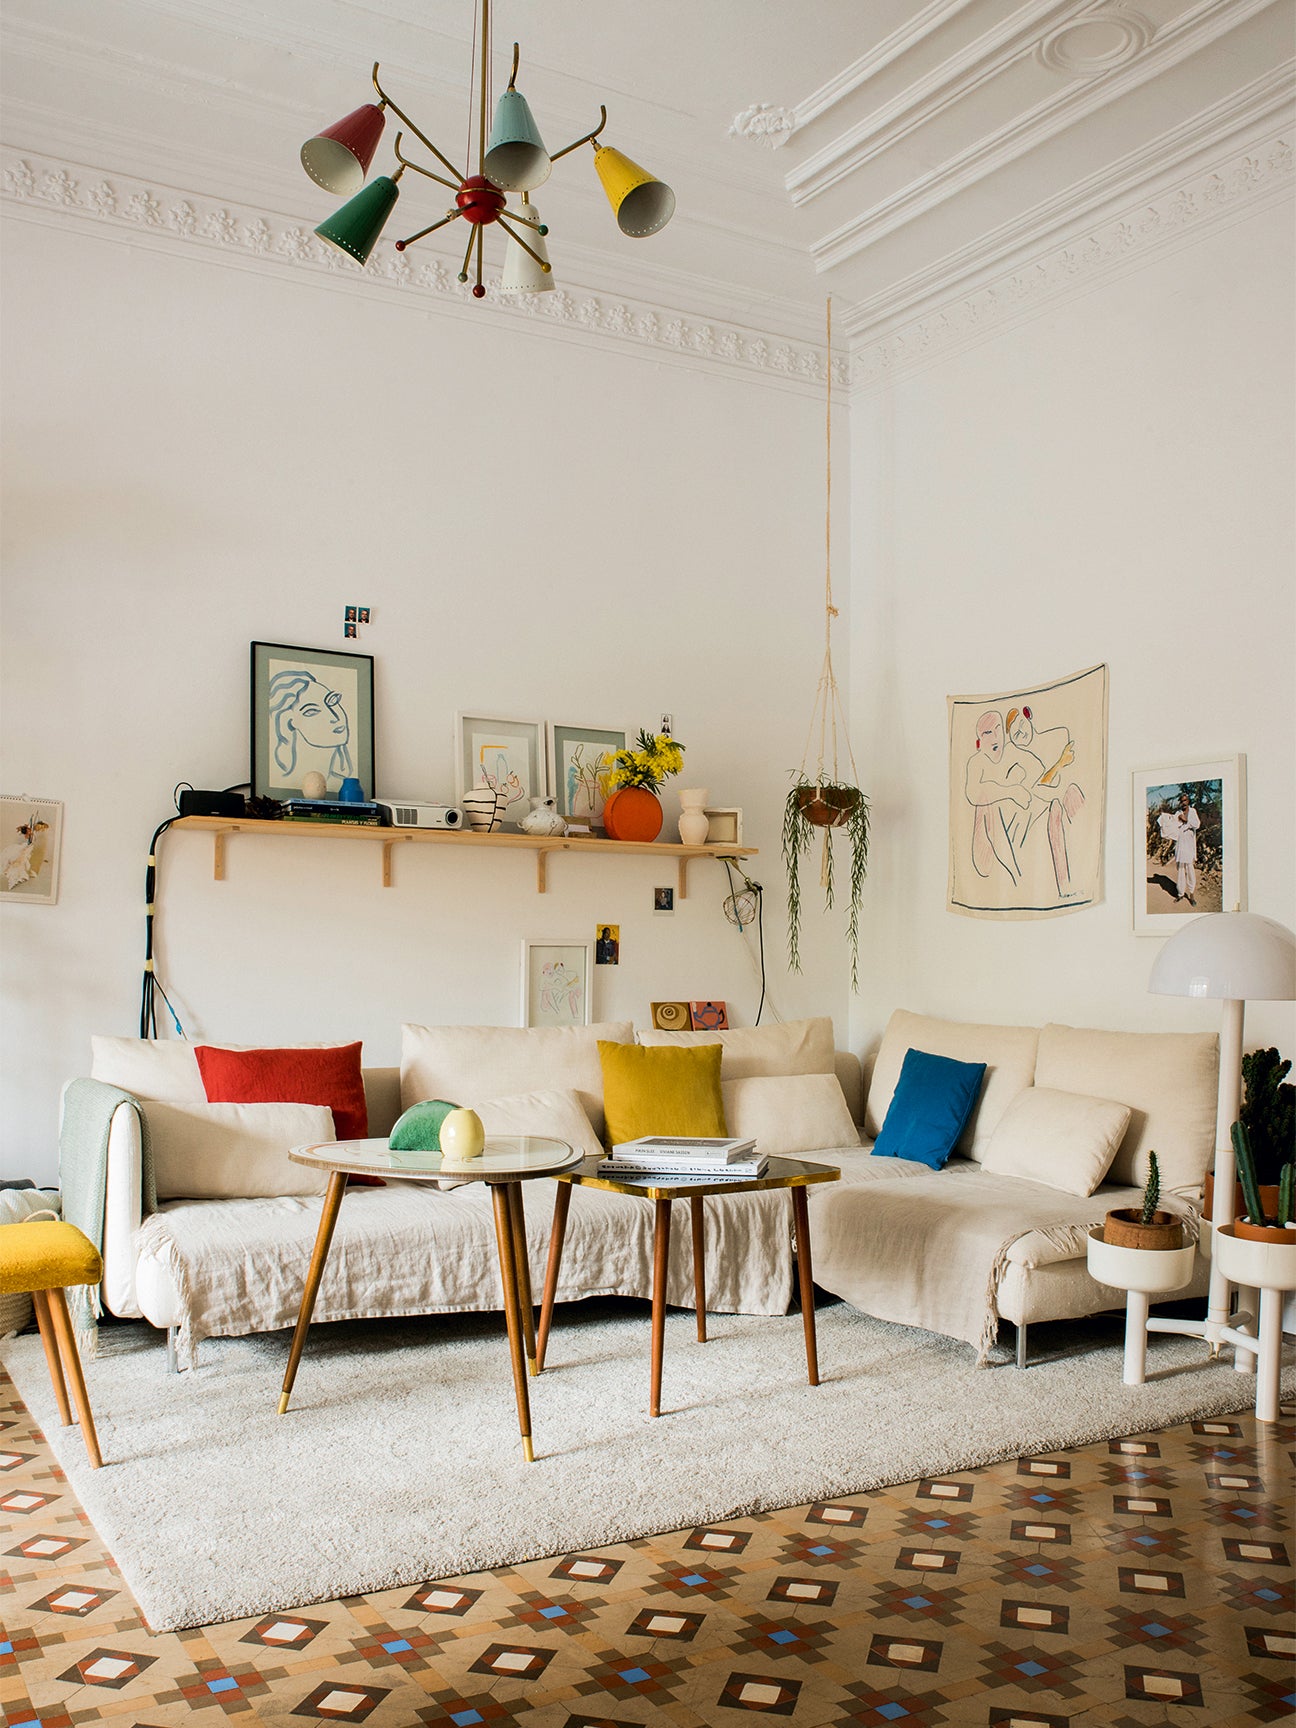 Primary color pillows in all-white living room